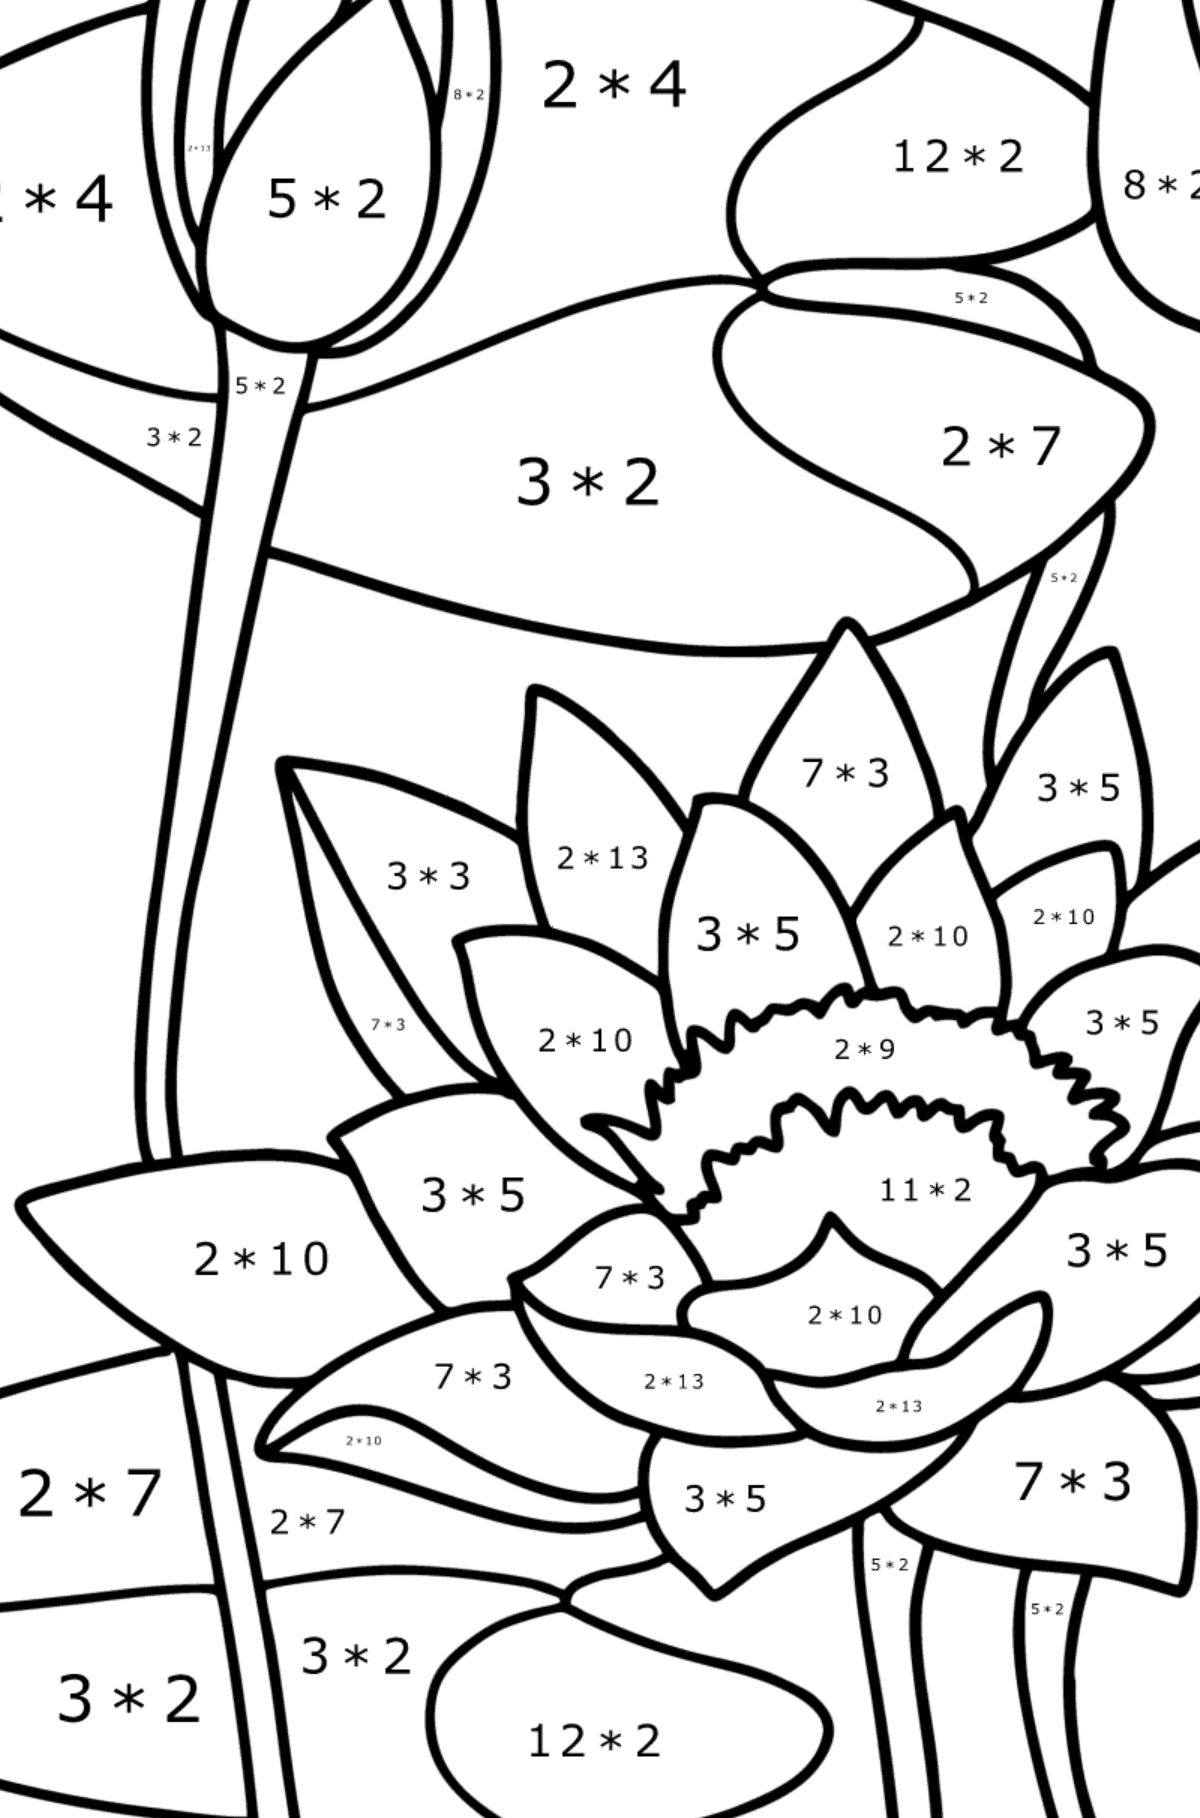 Water lily coloring page - Math Coloring - Multiplication for Kids